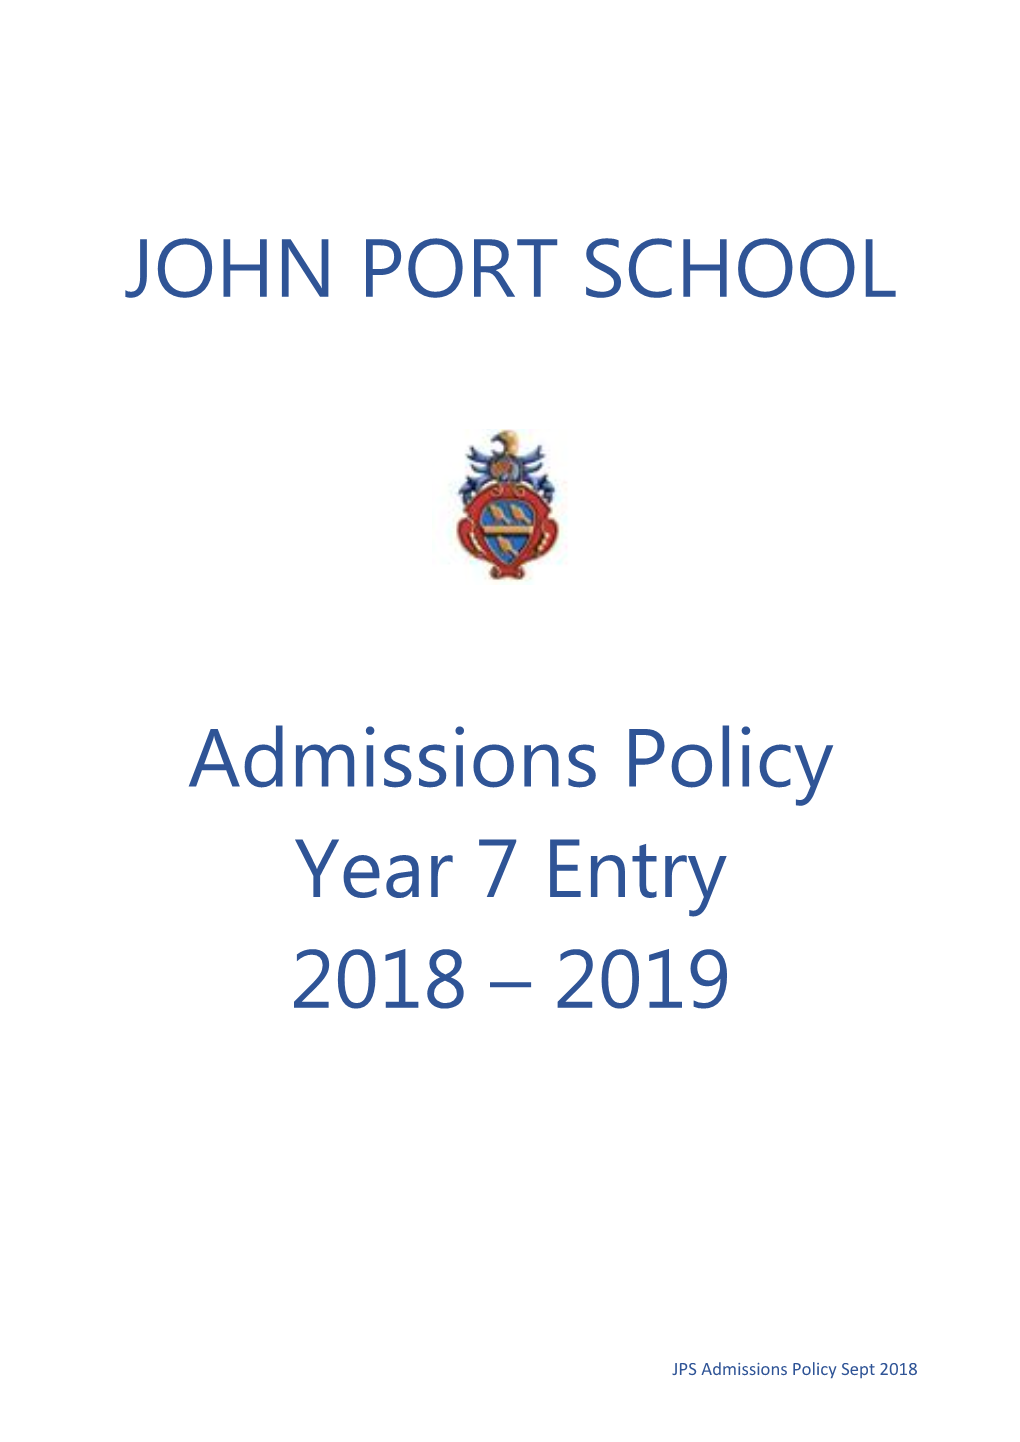 JOHN PORT SCHOOL Admissions Policy Year 7 Entry 2018 – 2019